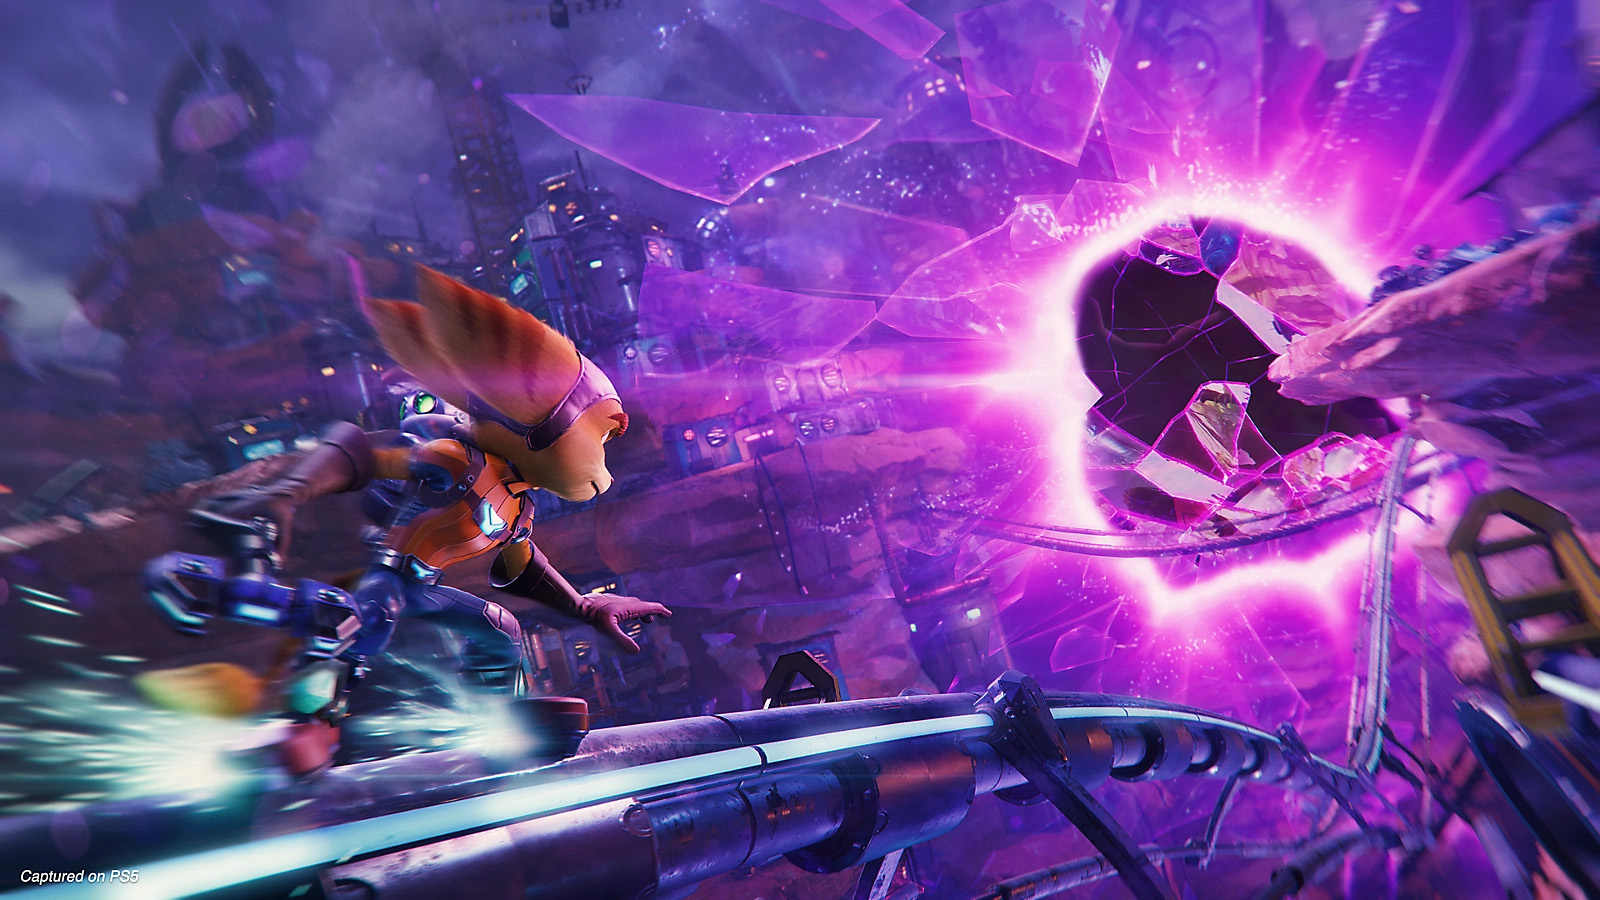 Ratchet & Clank Rift Apart PC Port Review – A Superb Way to Play the Game